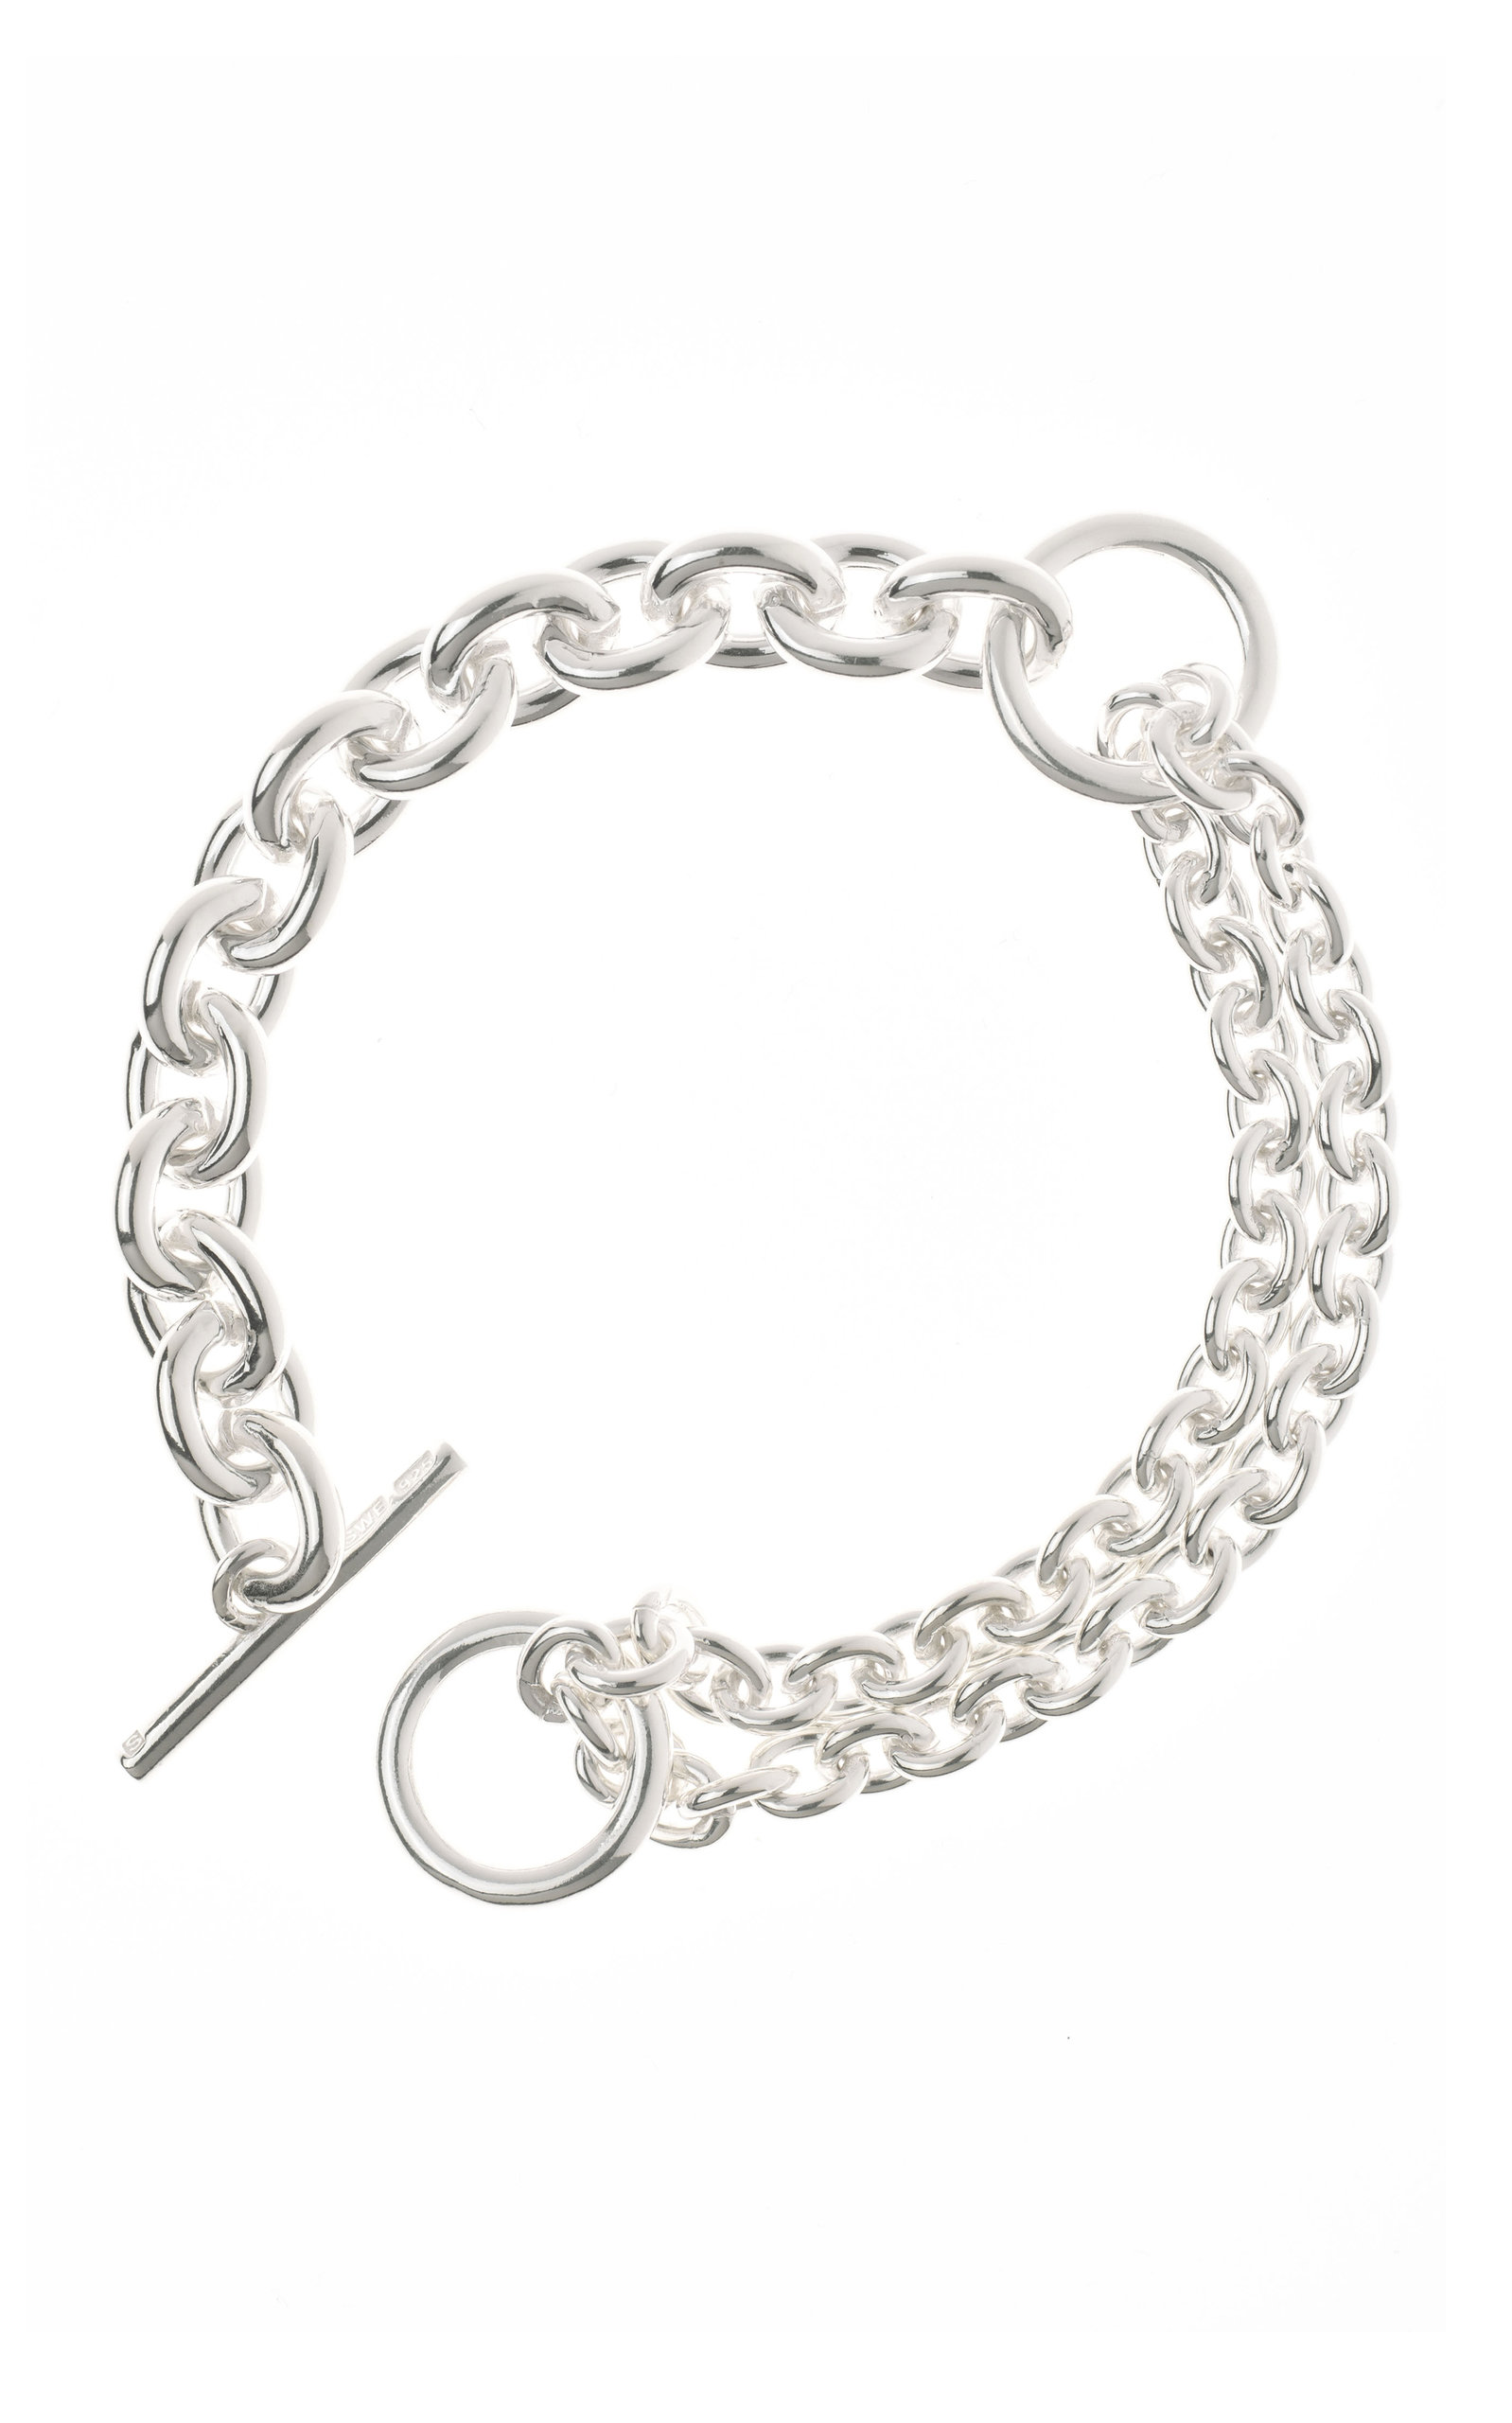 Double Sterling Silver Thick Bracelet